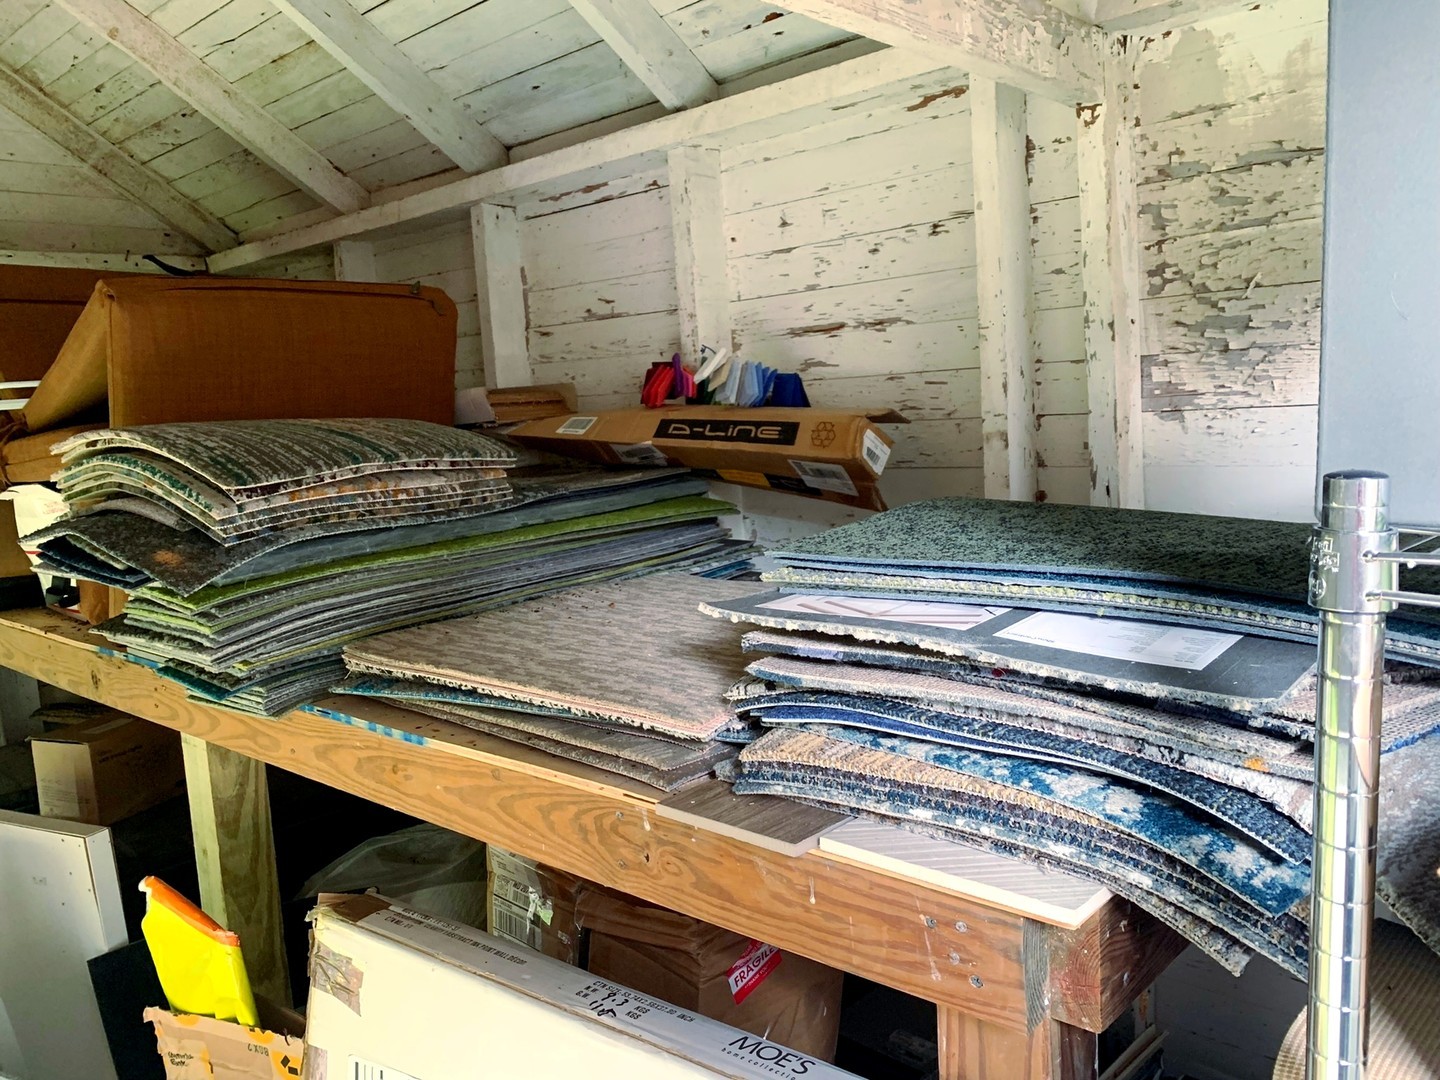 We *might* have a sample hoarding issue at our office. There are just so many great materials out there, it's hard to let them go!